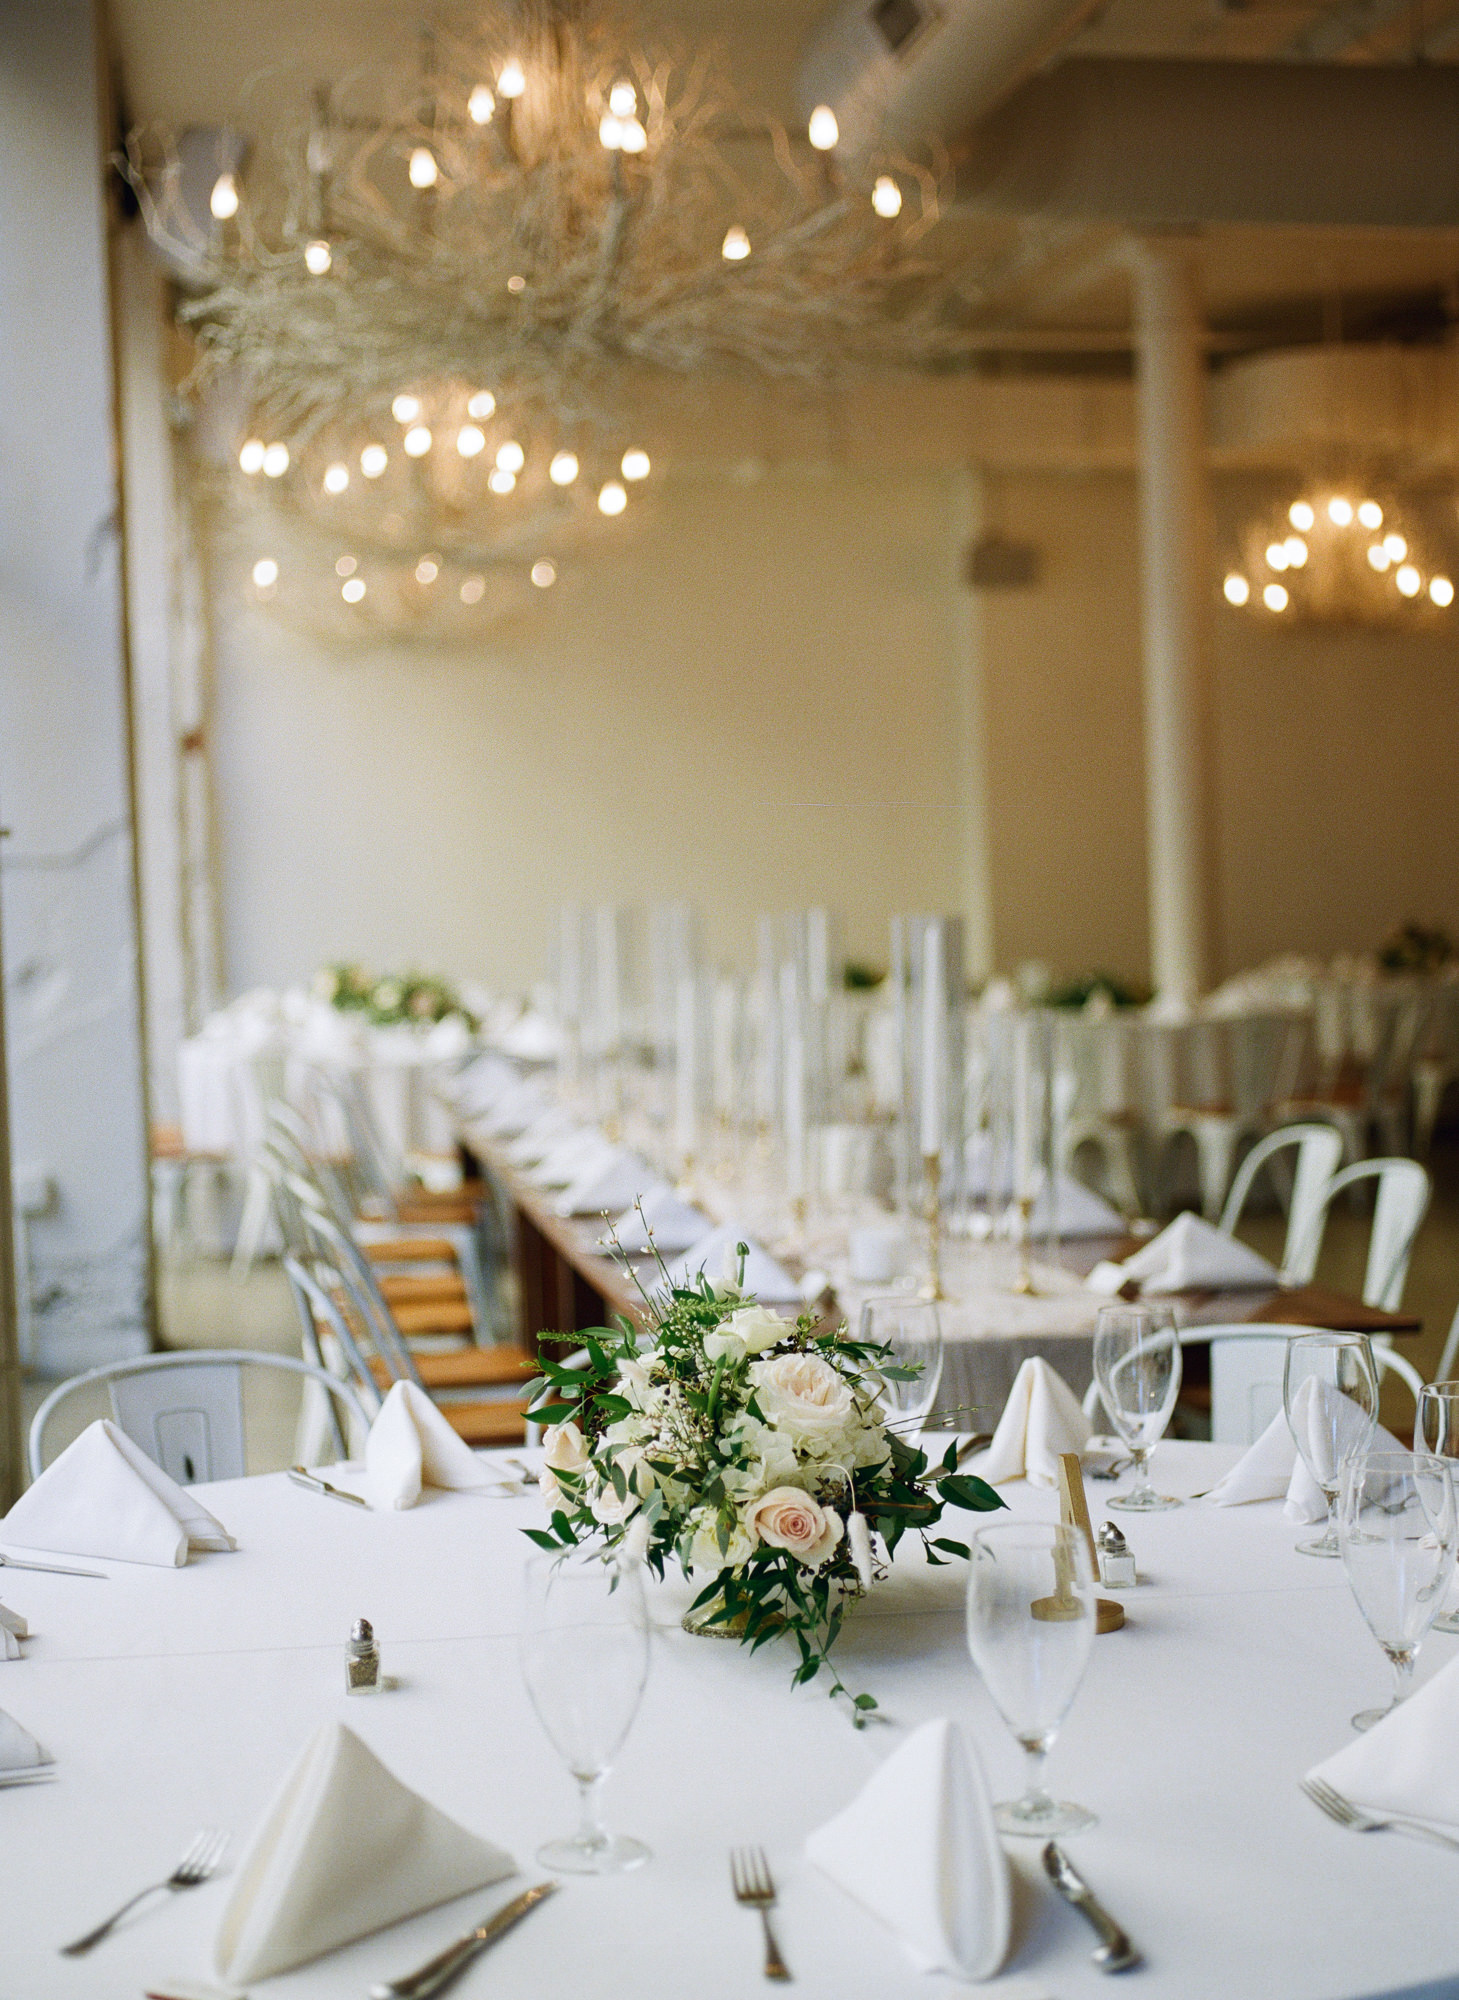 White flowers and candle vases decor at Willow St. Louis wedding reception; St. Louis fine art film wedding photographer Erica Robnett Photography